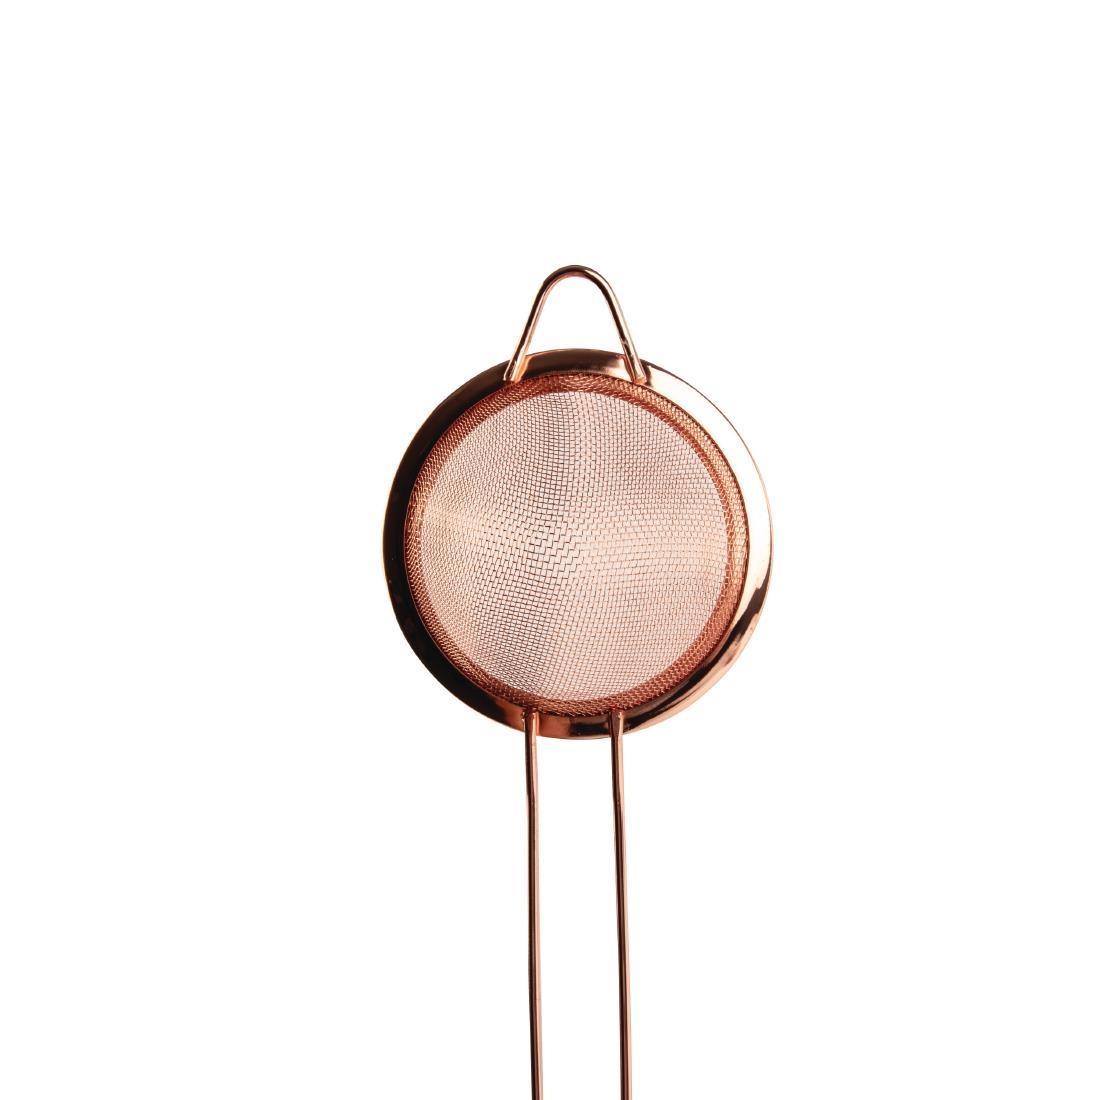 Olympia Mesh Strainer Copper - DR601  - 2